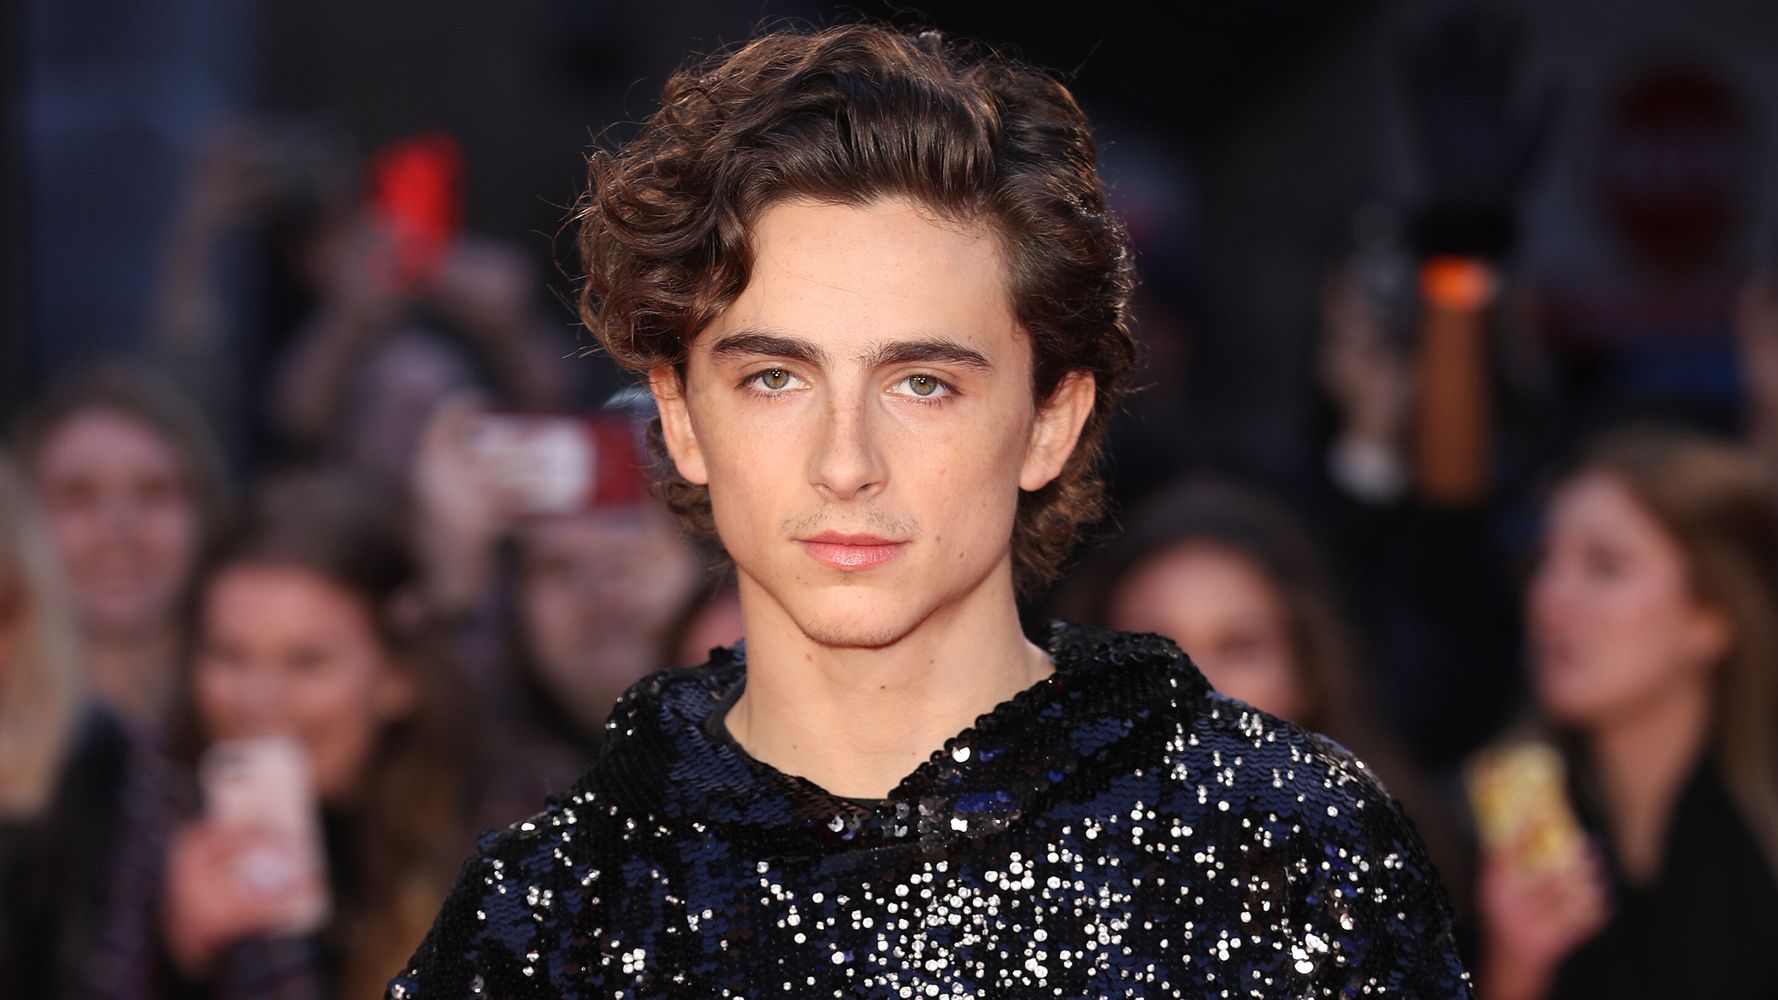 Timothée Chalamet Just Wore The Sparkly Sweatshirt Of Your M